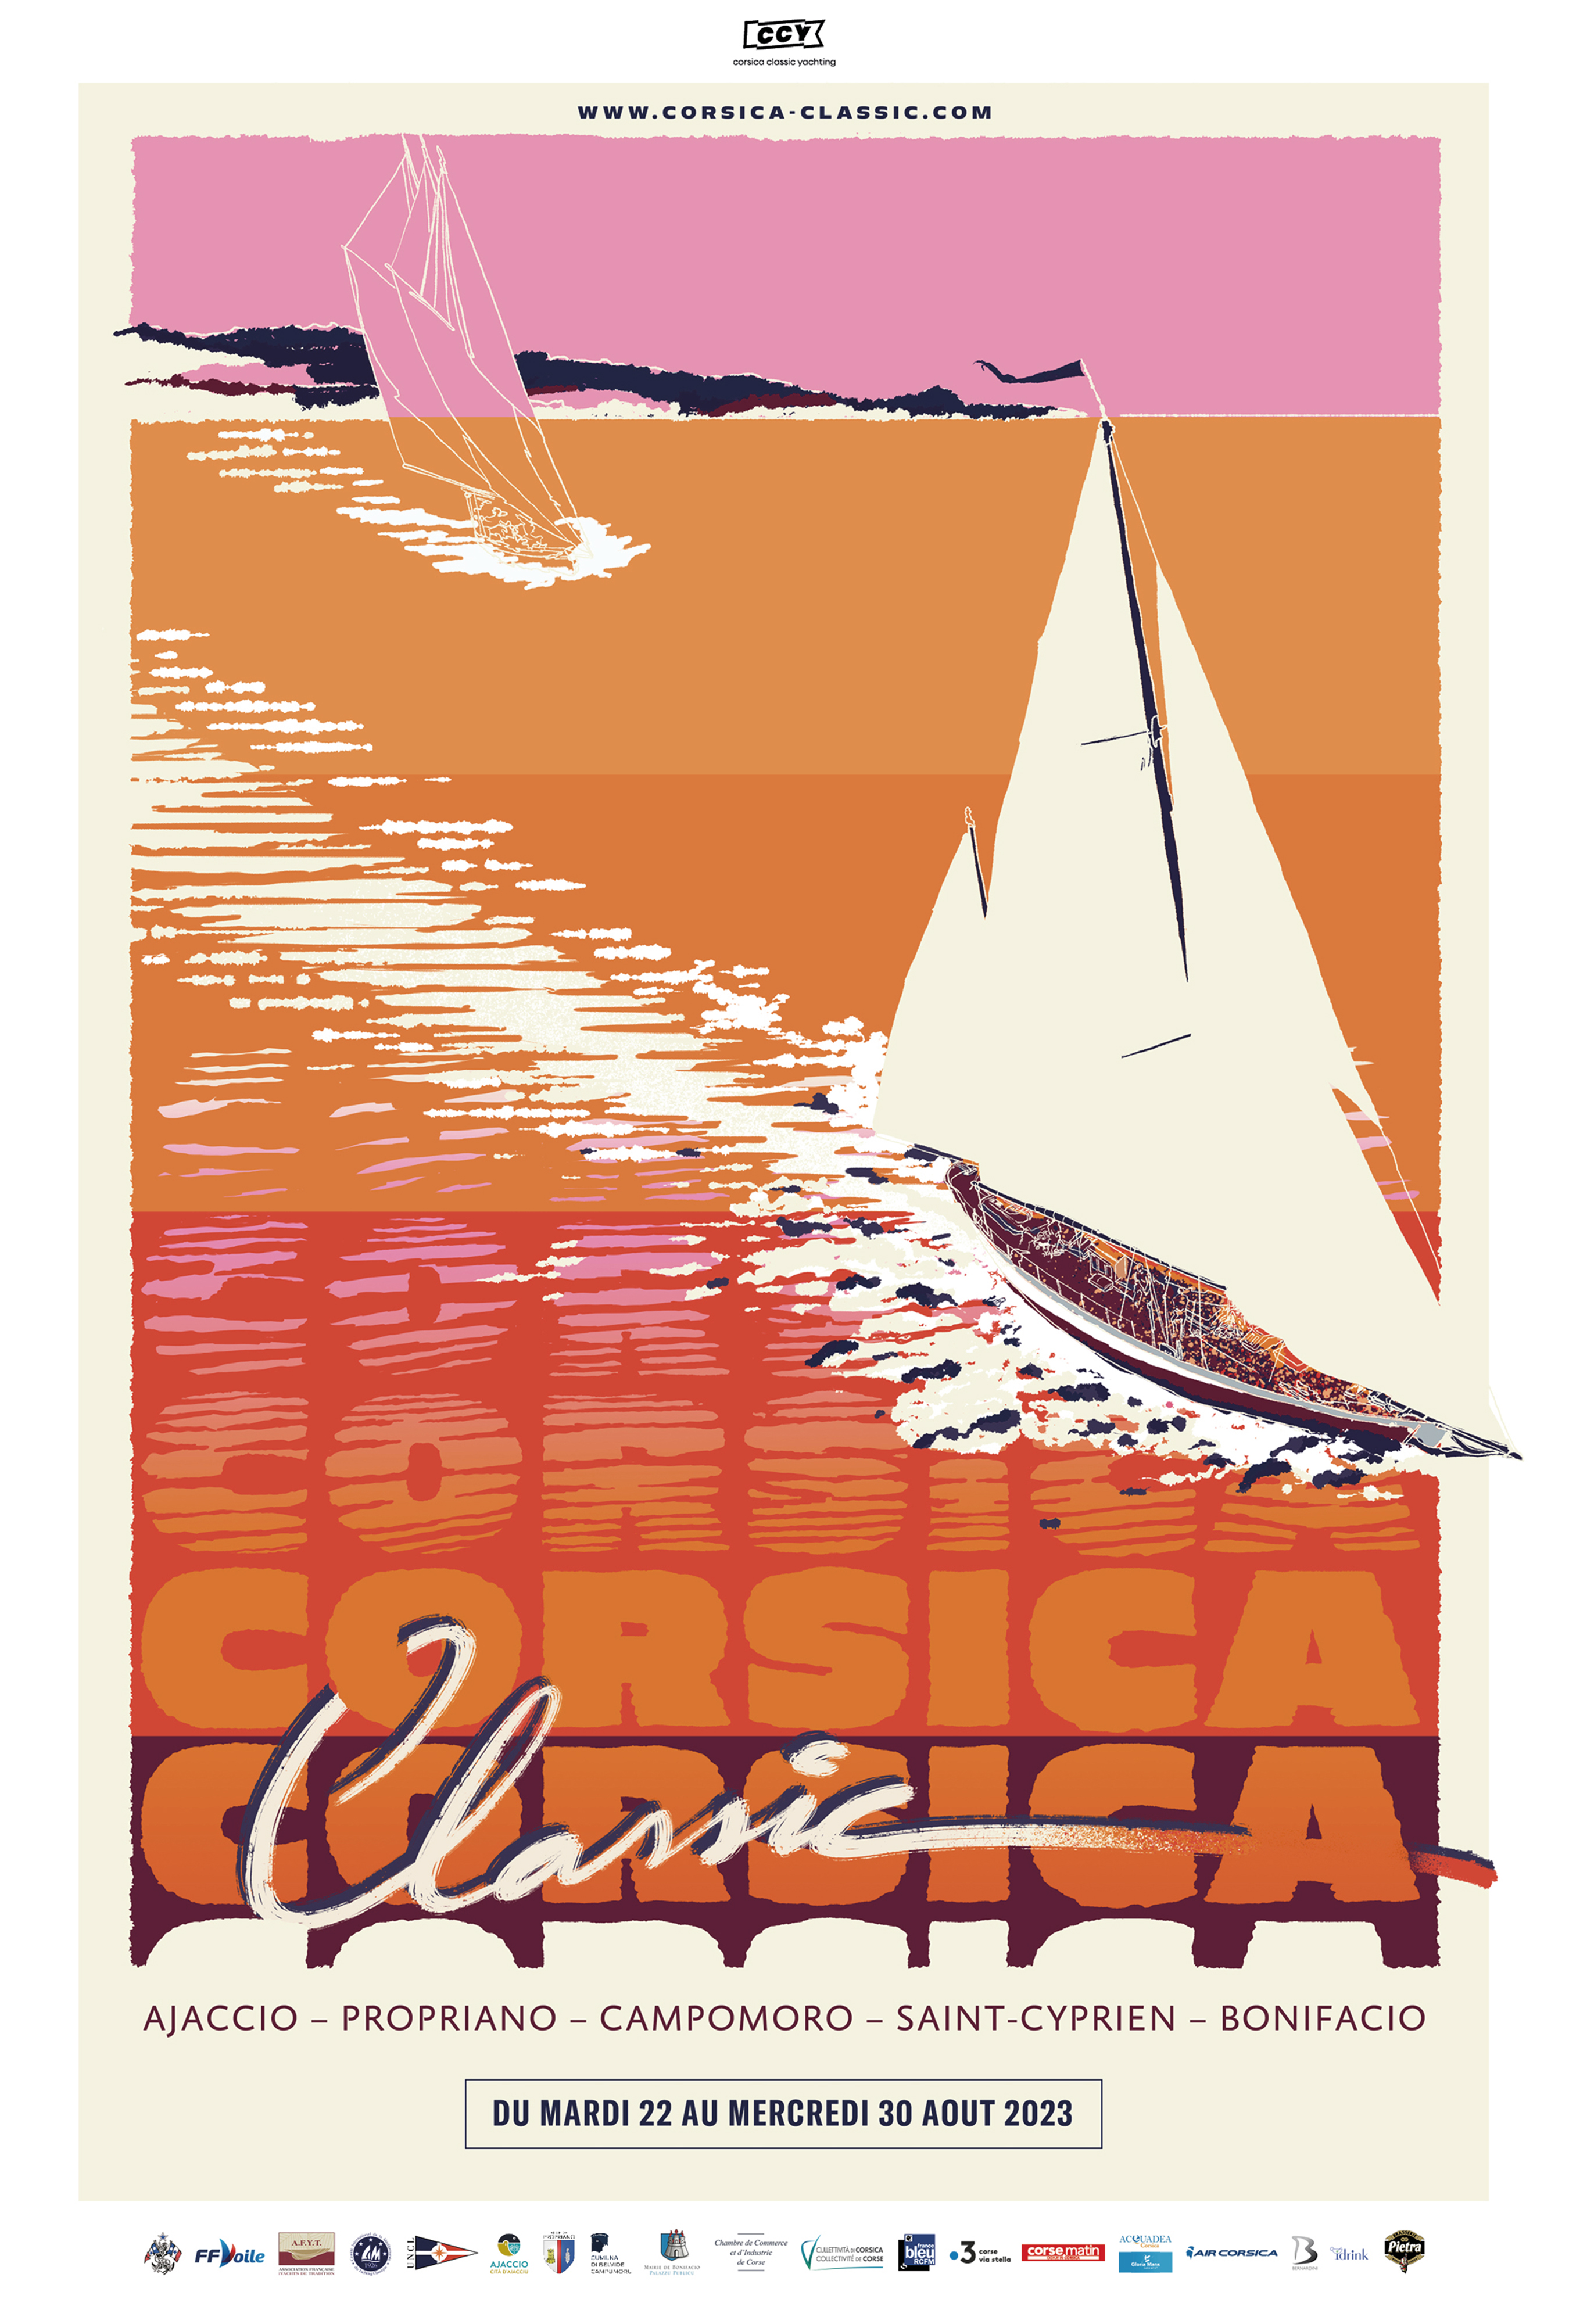 Corsica Classic 2023 affiche officielle design by Seb Lyky photo Arnaud Guilbert DR